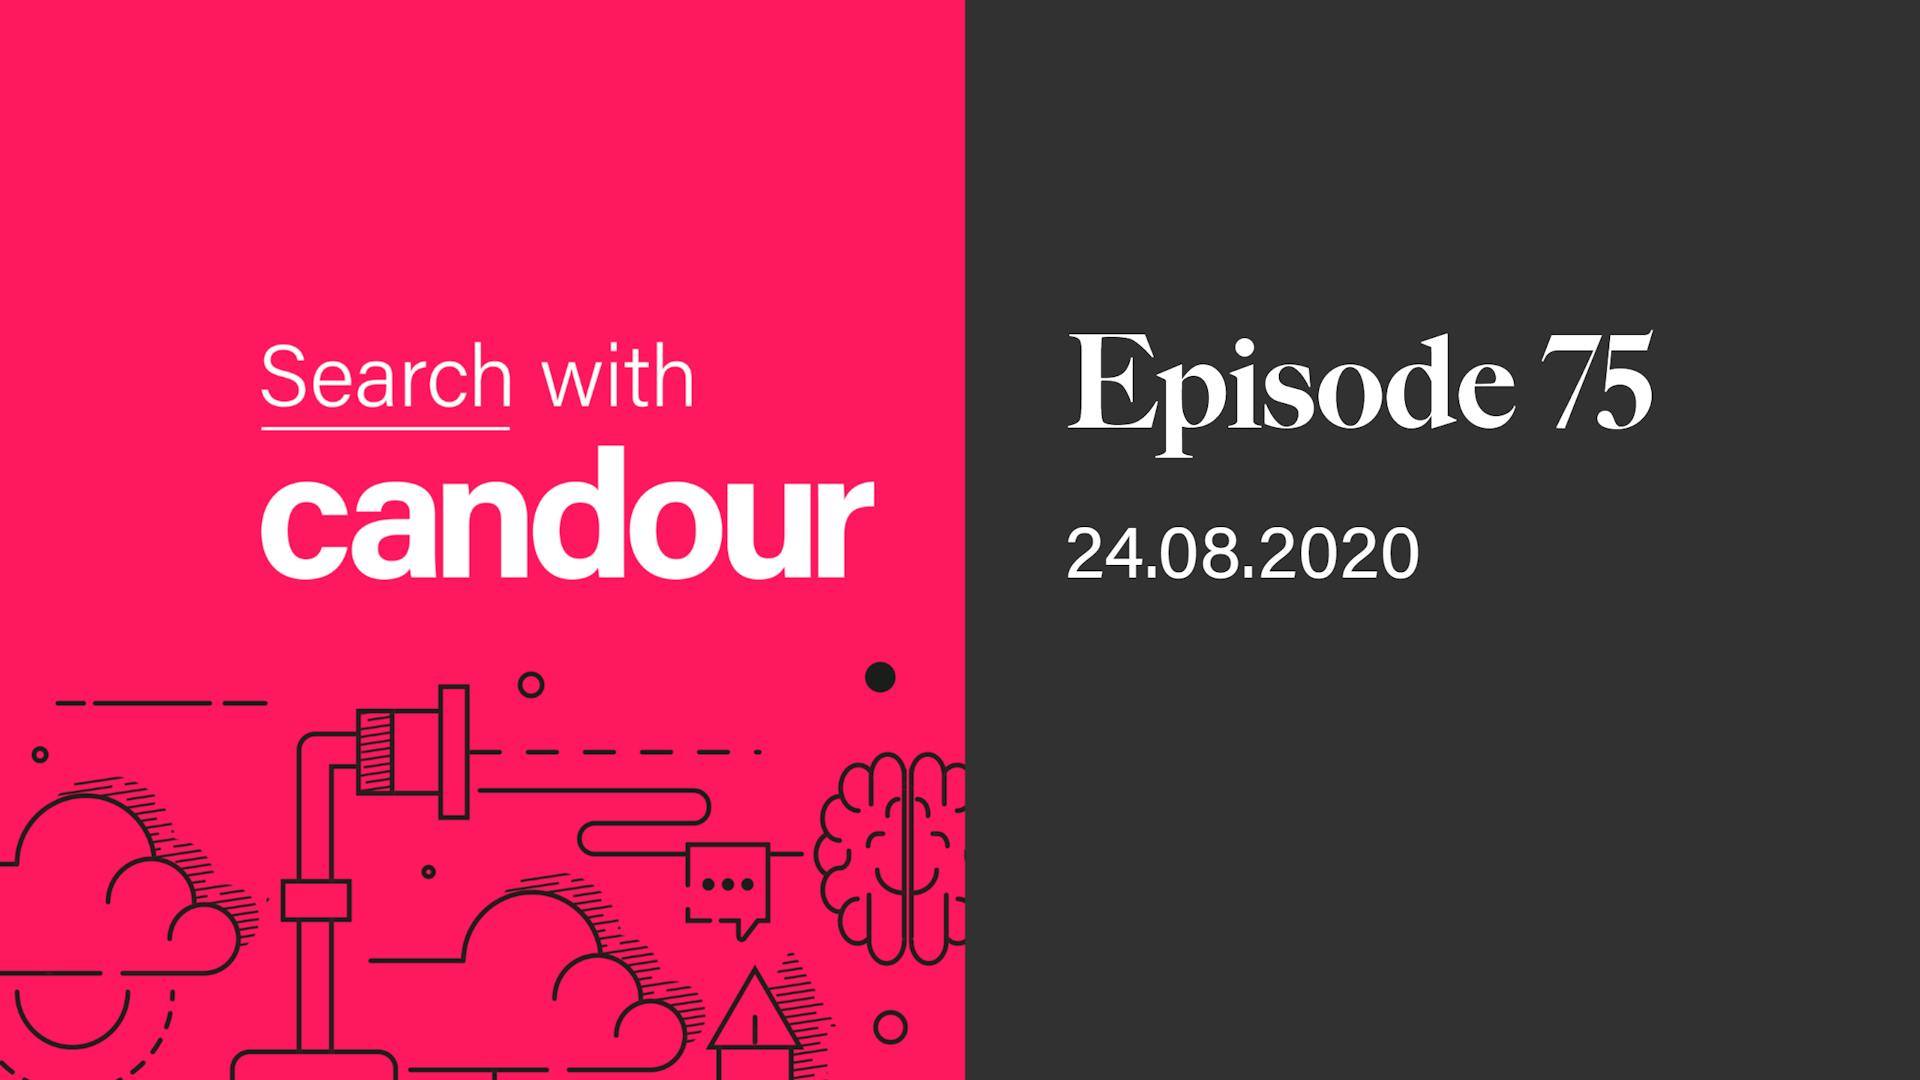 Episode 75 - Search with Candour